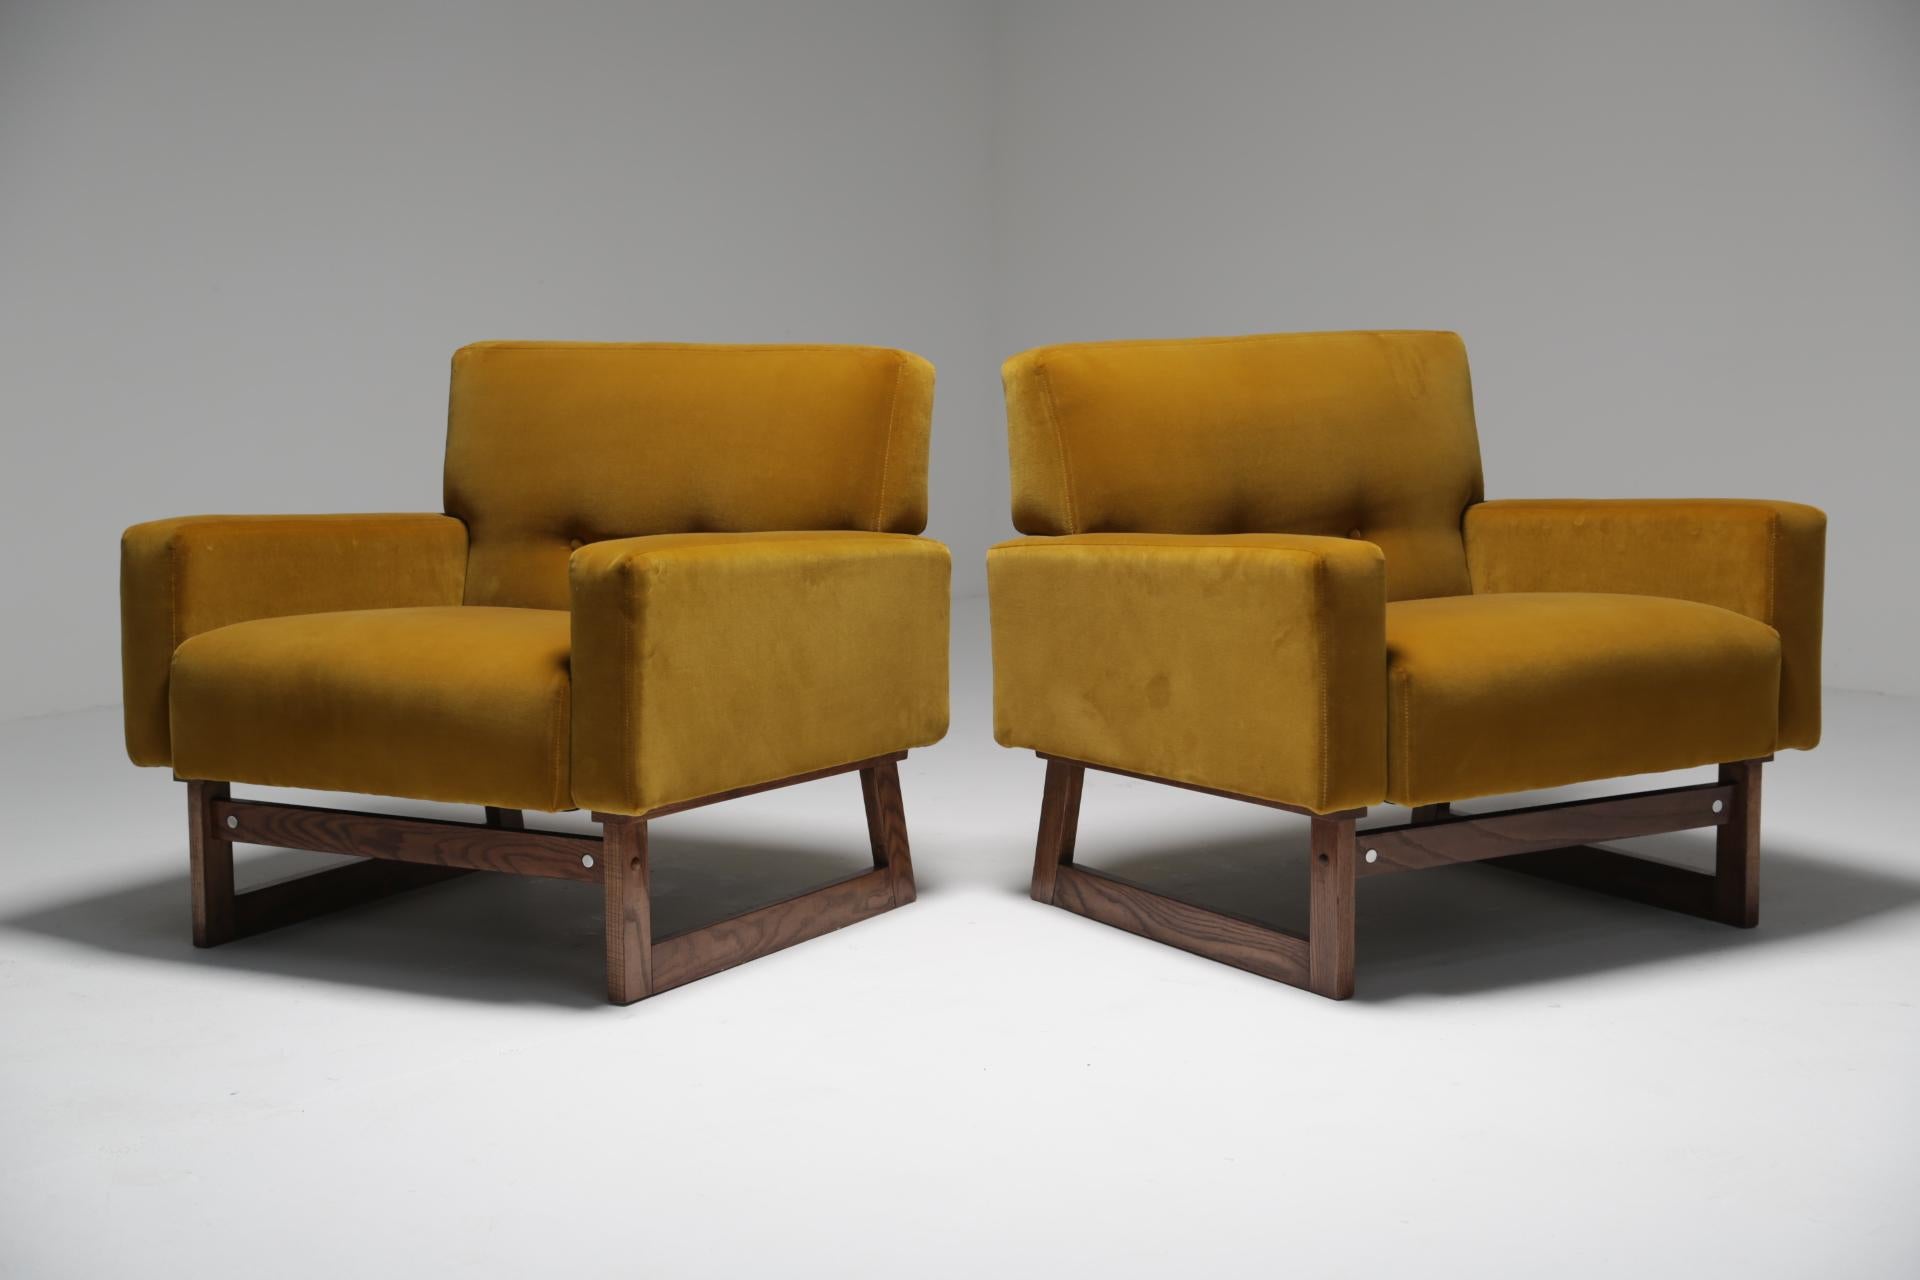 A stunning pair of gold Jens Risom style midcentury velvet armchairs. These chairs sit on natural ashwood sleigh bases with chrome disc screw covers. They have been recently reupholstered in a high-quality luxe Gold 100% 